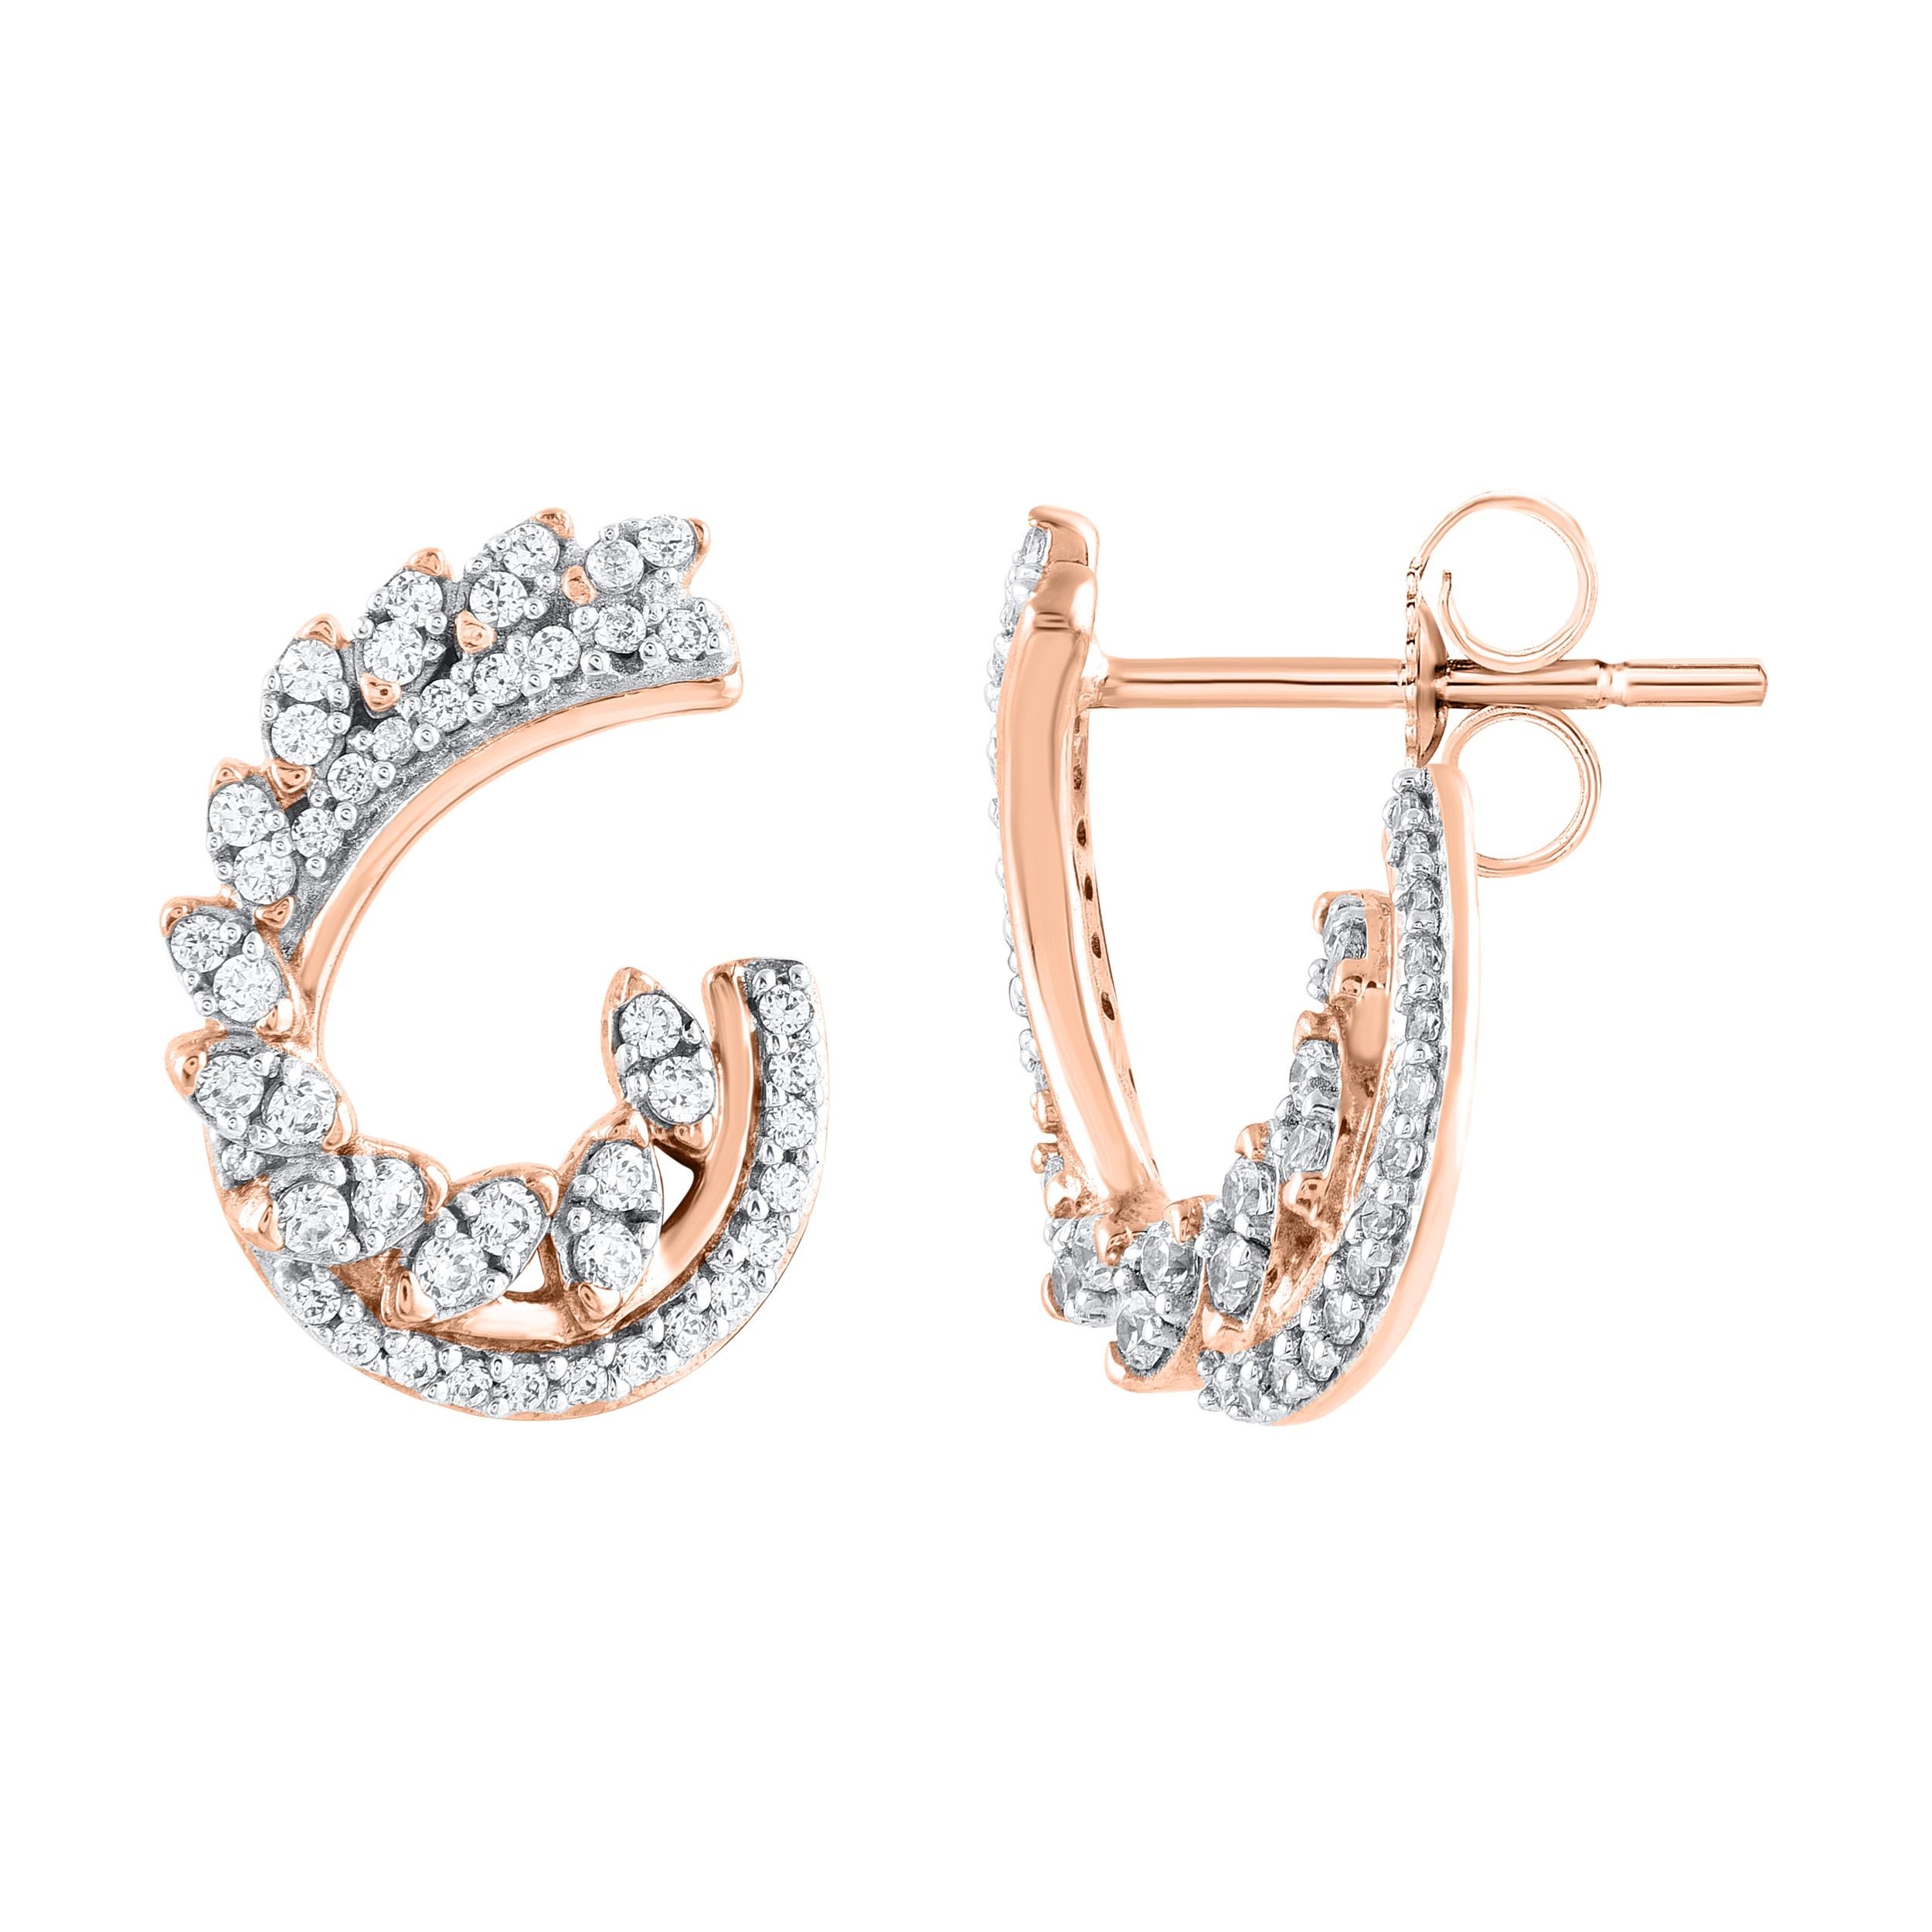 You'll adore the petite touch of shimmer these designer stud earrings add to your attire. Beautifully hand-crafted by our inhouse experts in 14 karat rose gold and embellished with 90 single cut and brilliant cut round diamonds in prong setting and